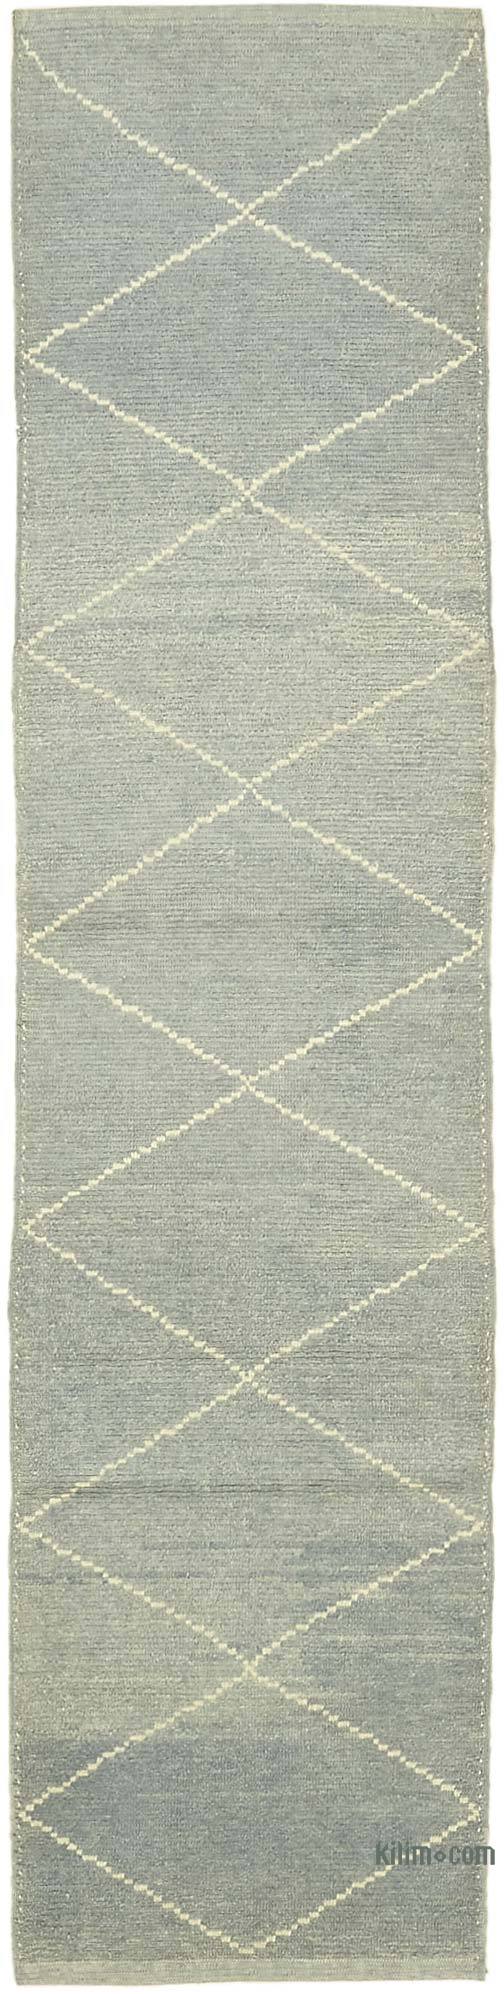 New Moroccan Style Hand-Knotted Runner - 2' 10" x 11' 5" (34 in. x 137 in.) - K0057559